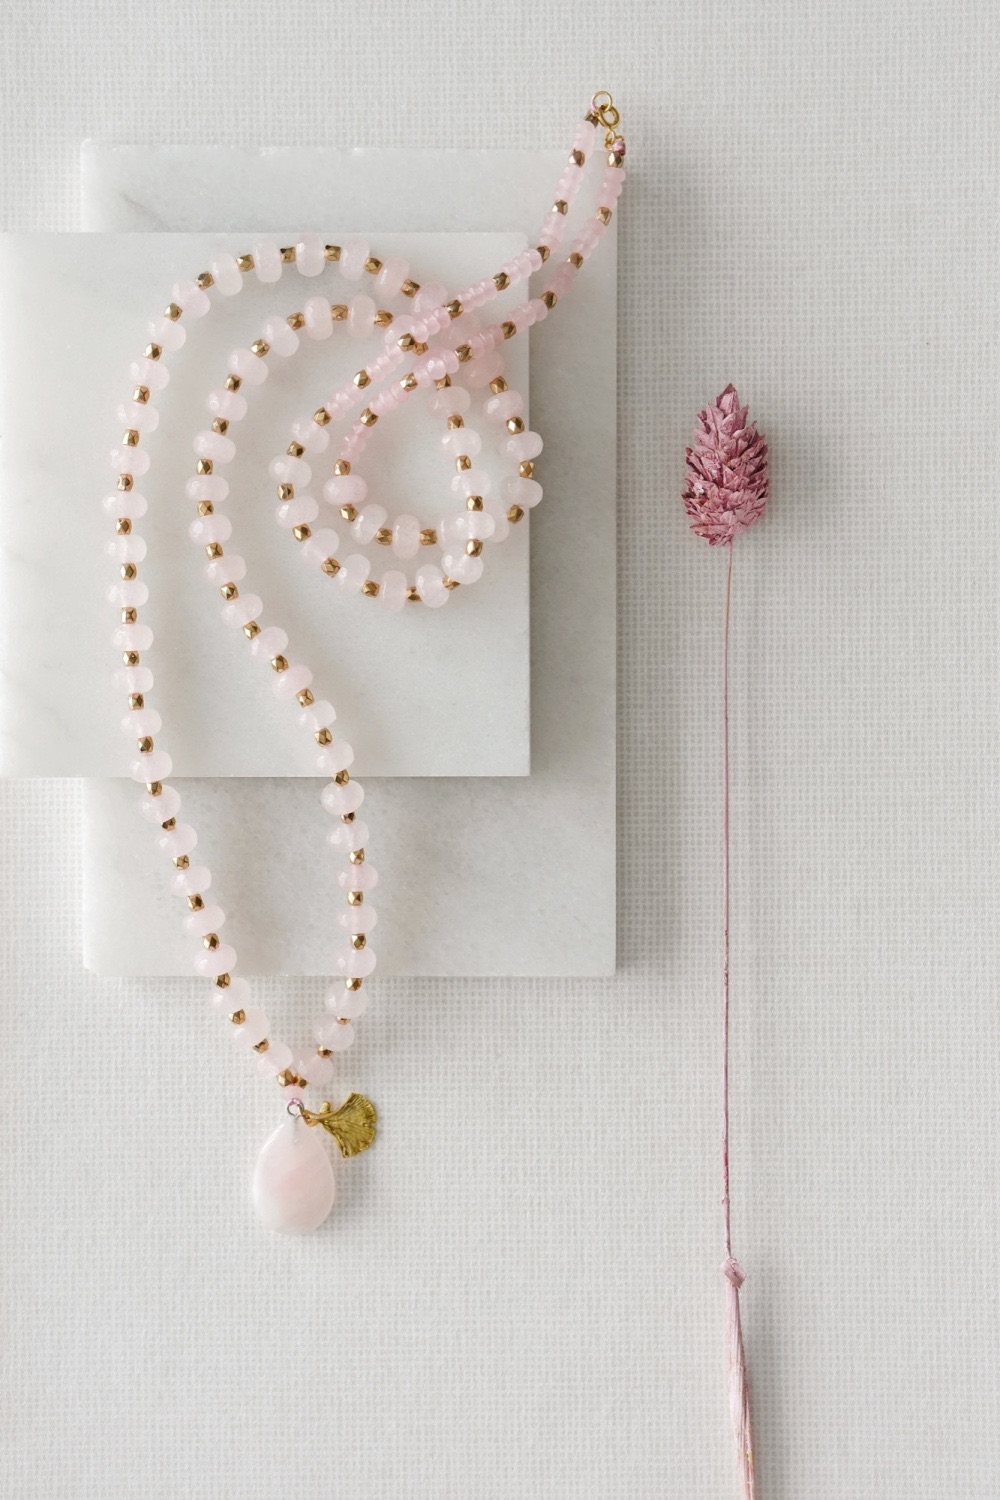 Long Length Rose Quartz Stone Necklace with Gold Tone Detail by Xander Kostroma